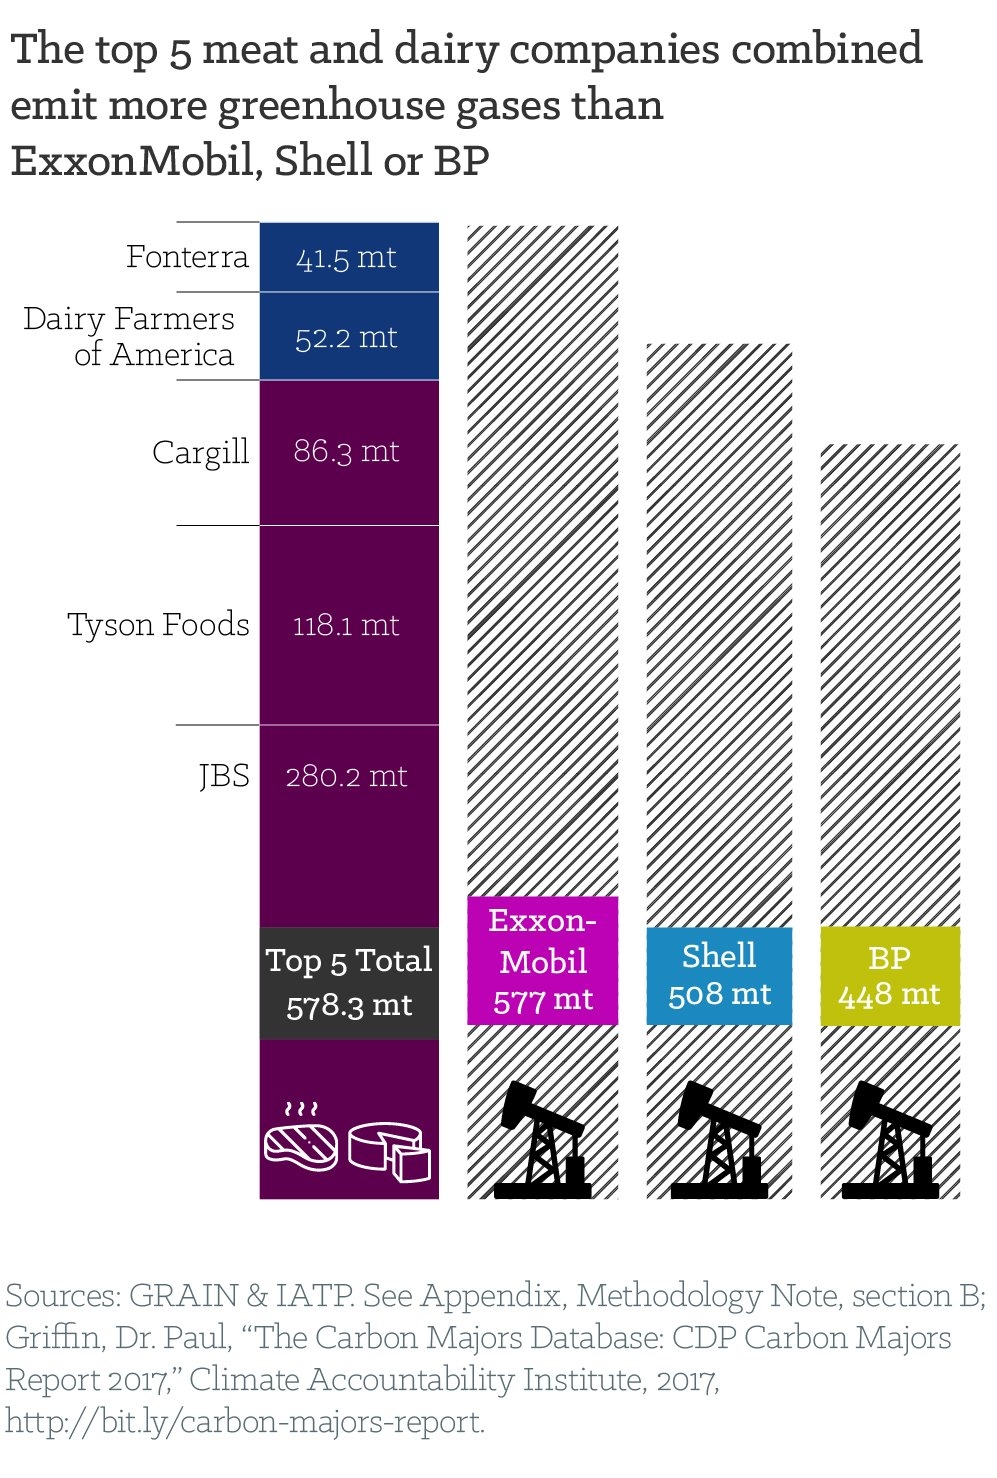 The top five meat and dairy companies combined emit more GHG than ExxonMobil, Shell or BP